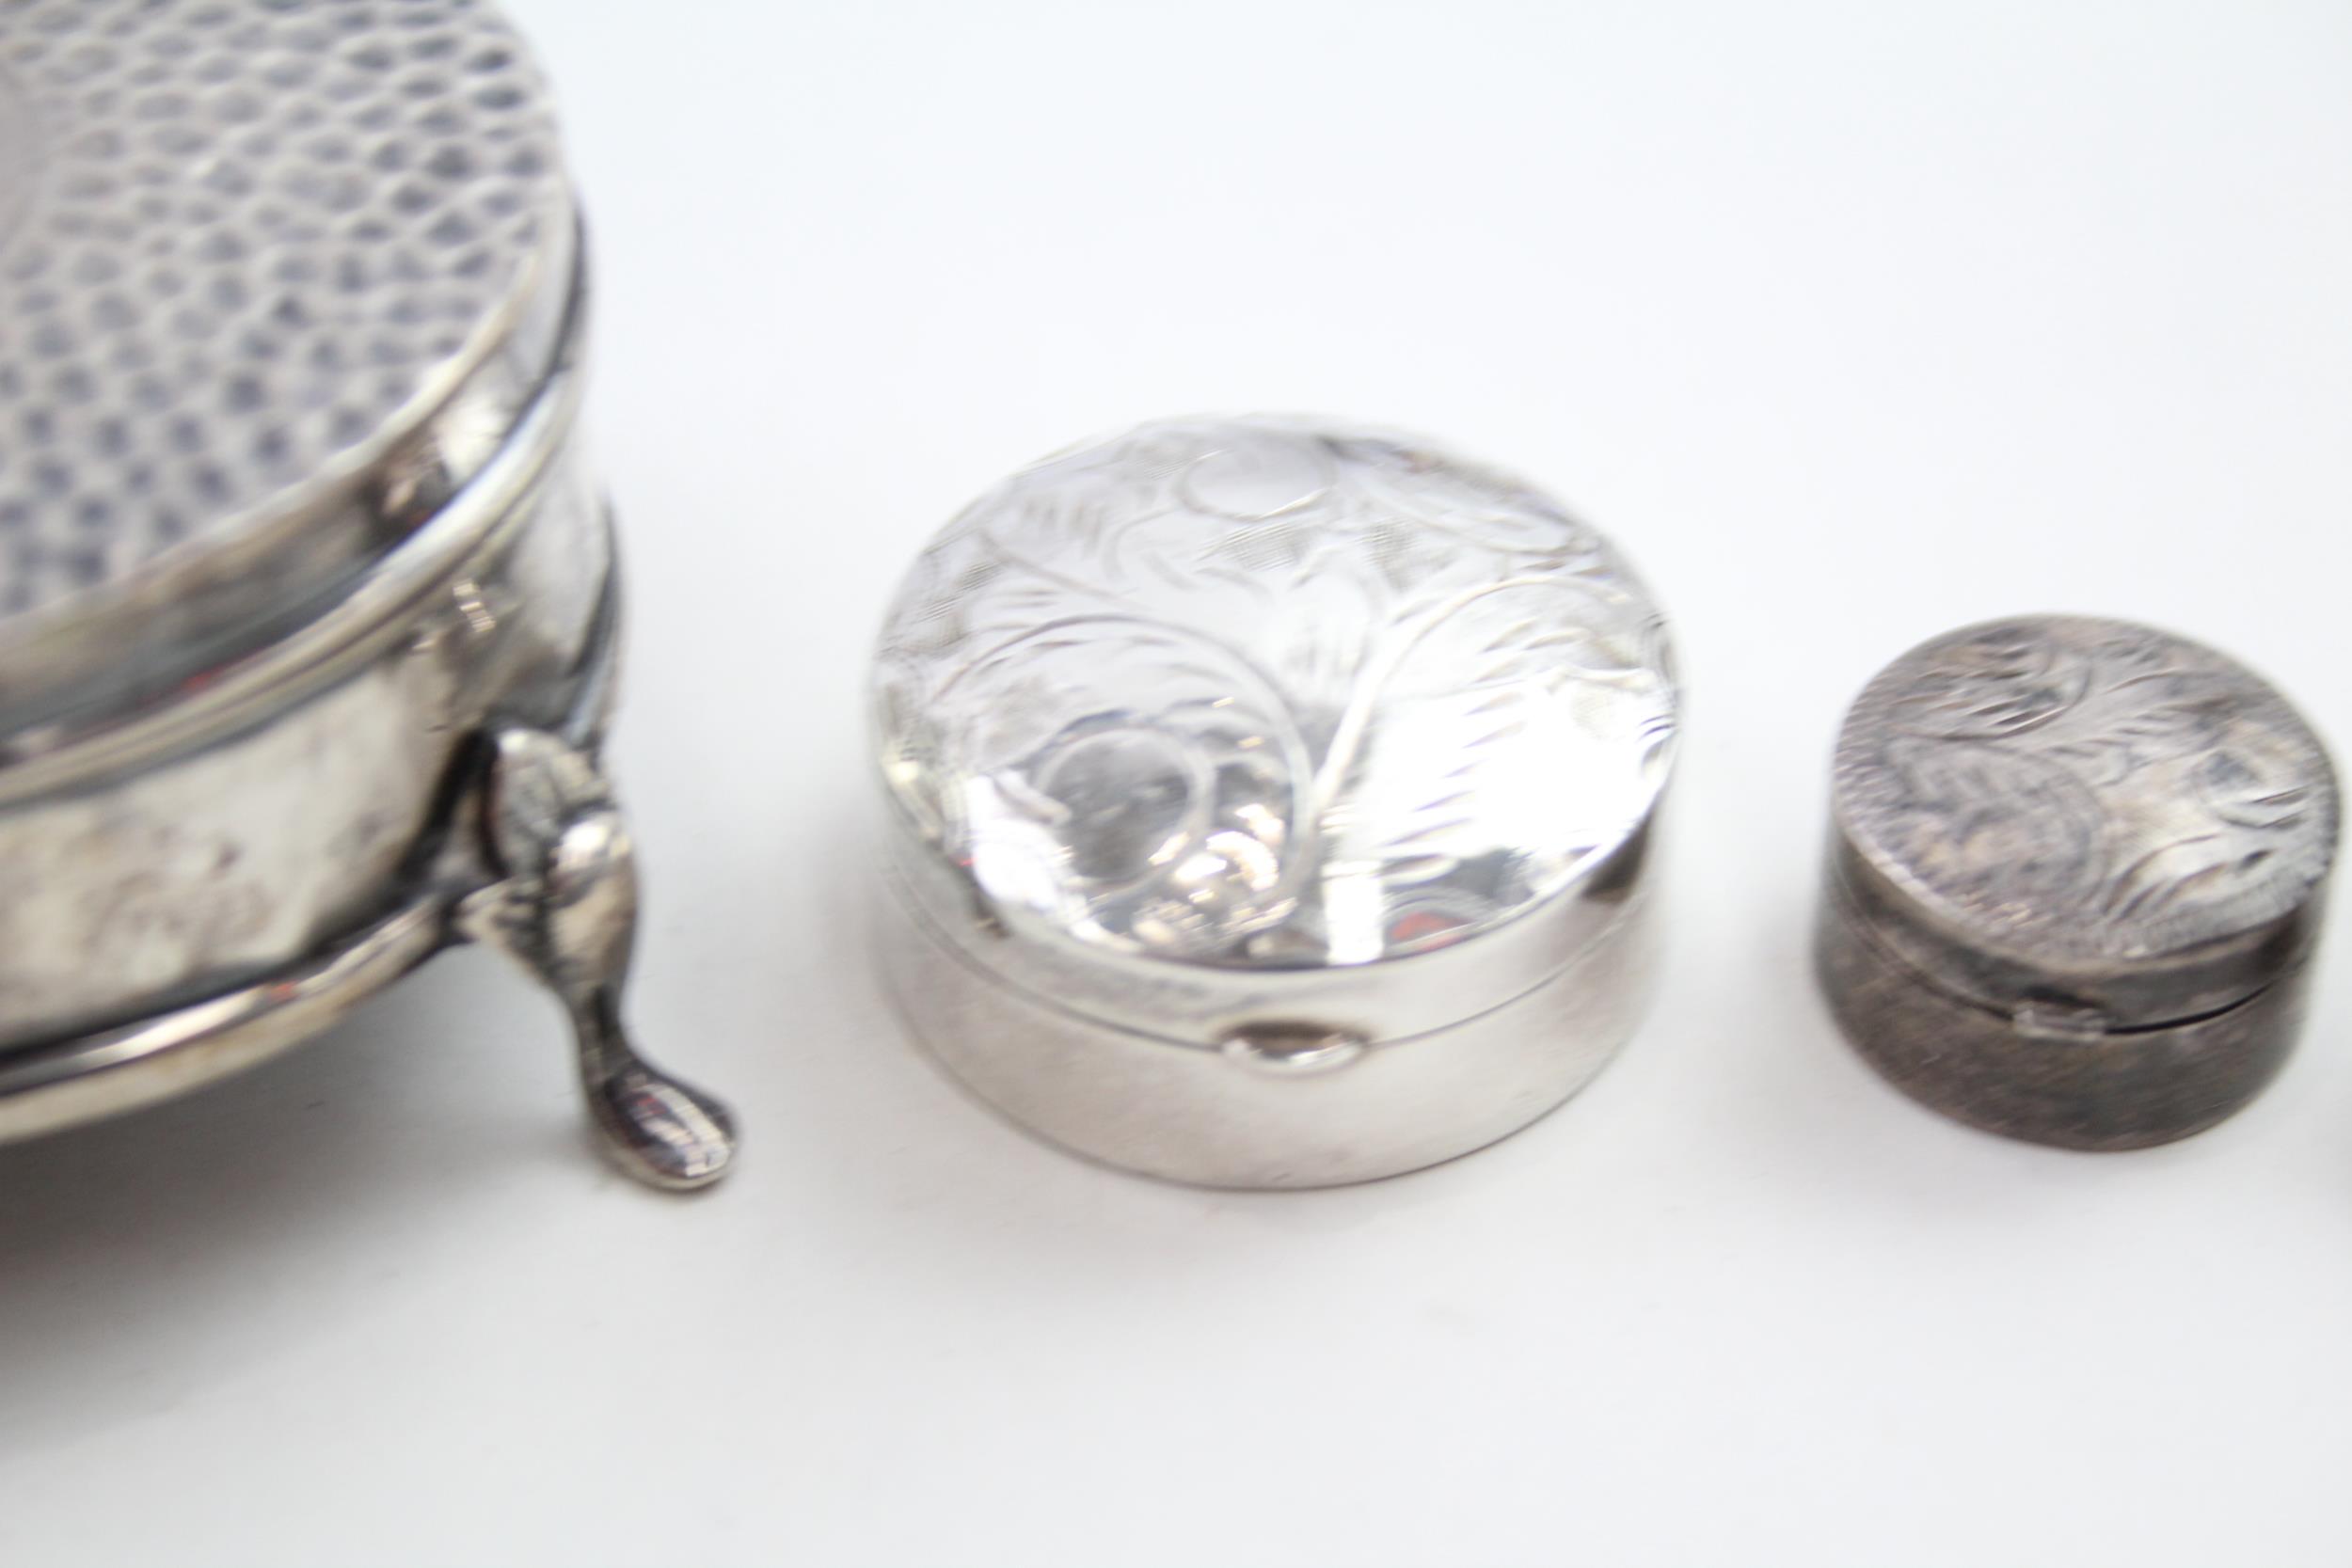 4 x Antique / Vintage Hallmarked .925 STERLING SILVER Pill / Trinket Boxes (59g) - In antique / - Image 3 of 4